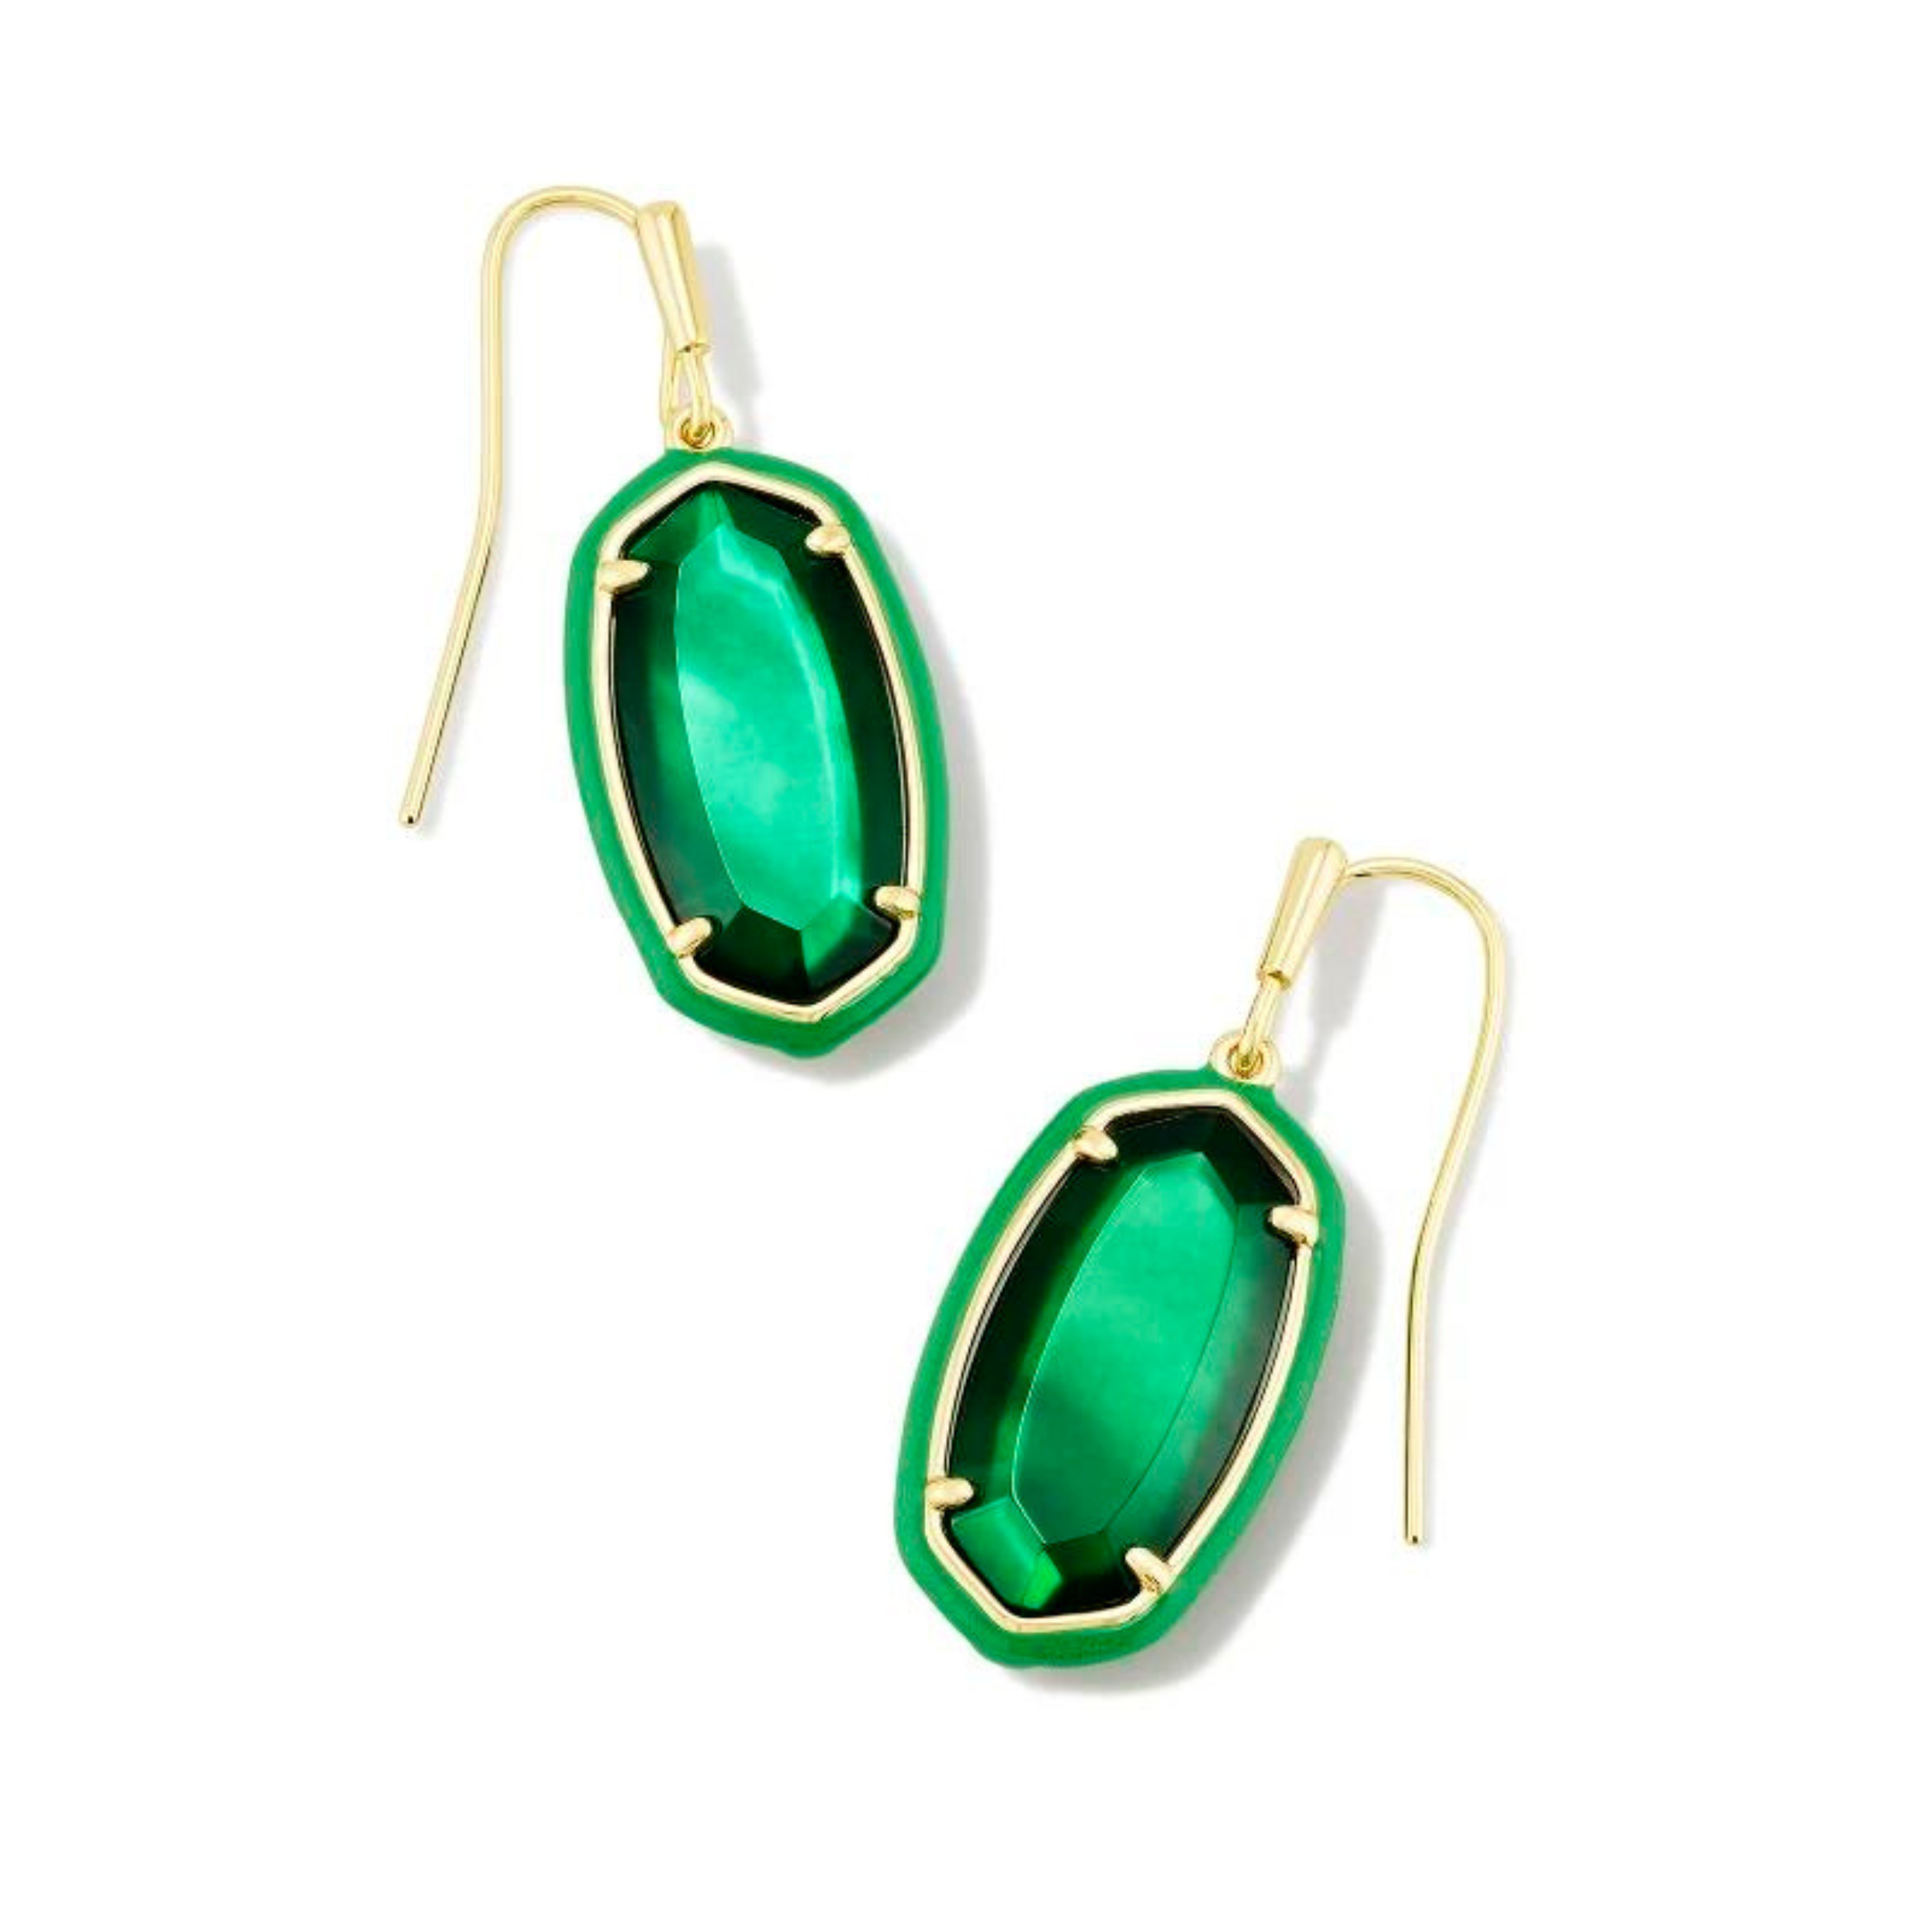 Emerald framed, oval shaped drop earrings with a center emerald stone and a gold fish hook earring. These earrings are pictured on a white background. 